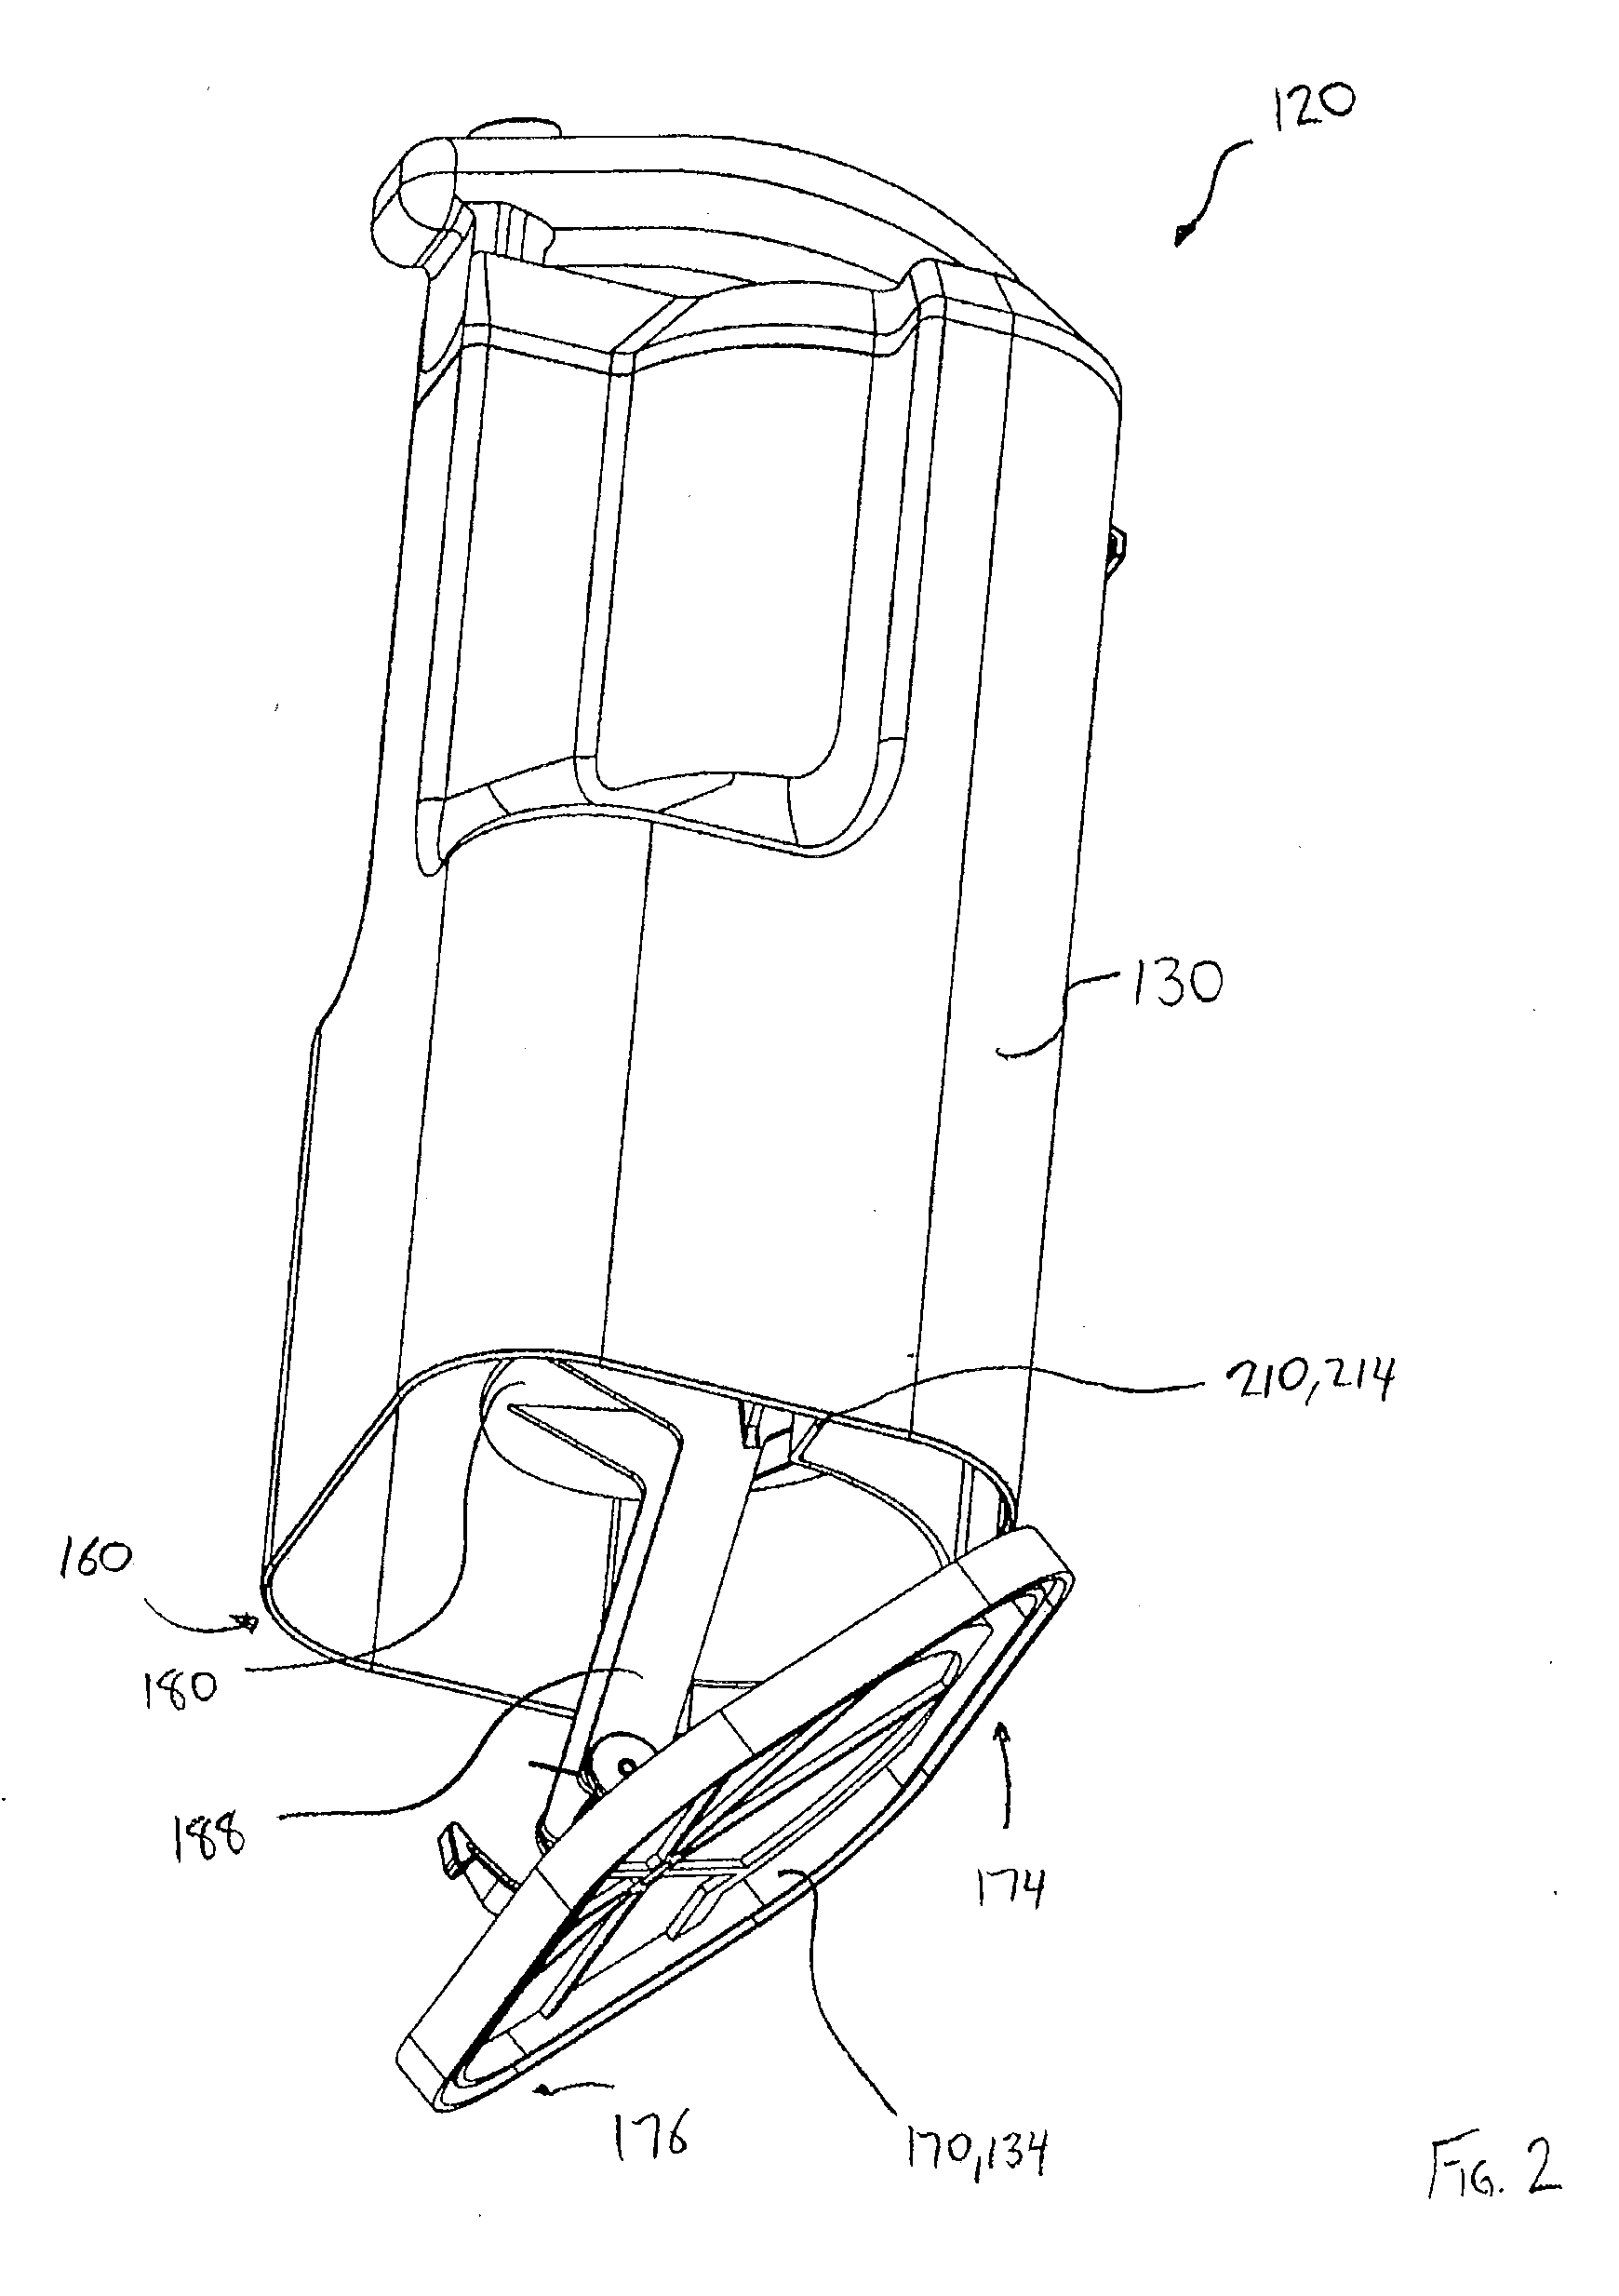 Cyclone construction for a surface cleaning apparatus